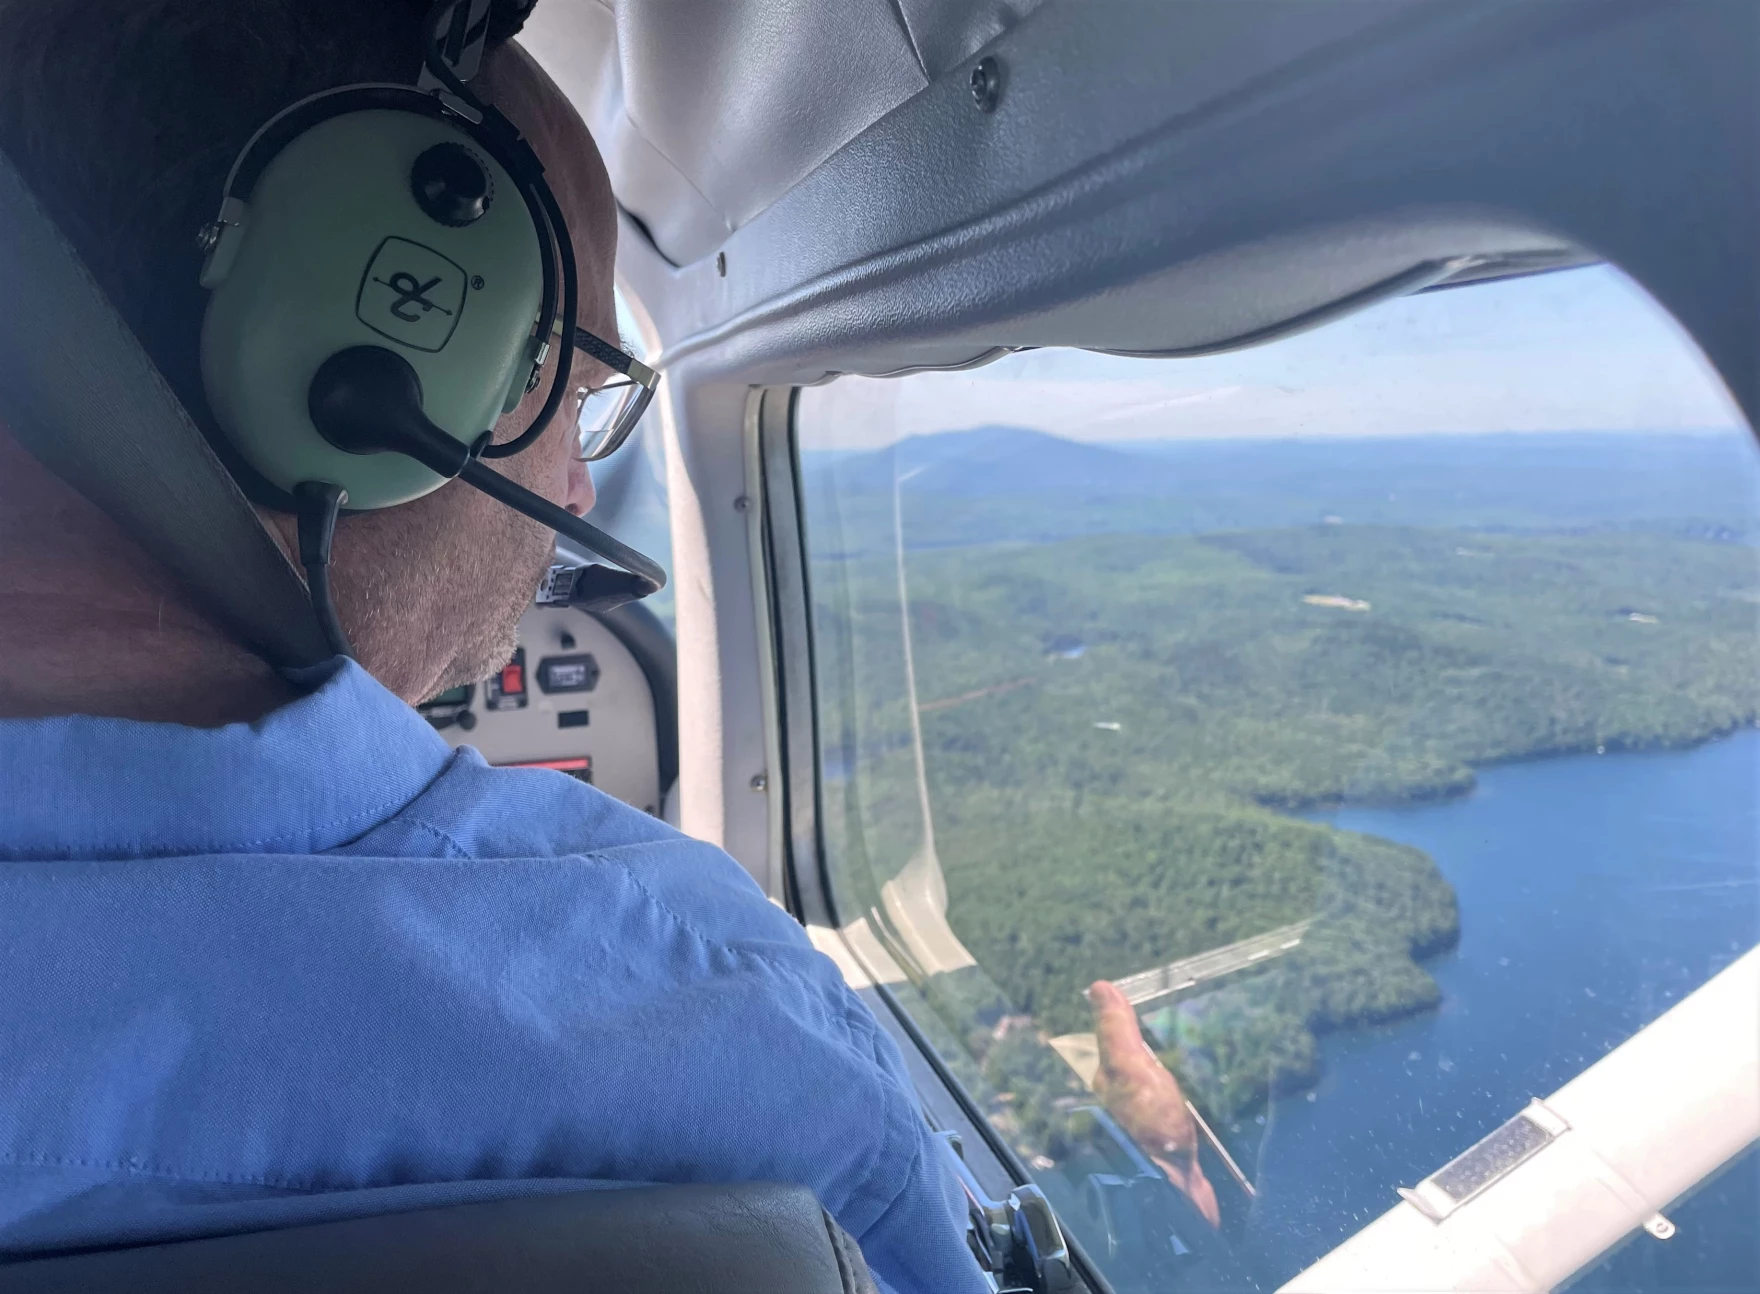 Forester Kyle Lombard looks out the window of a small airplane, searching for damage in the New Hampshire forest below.